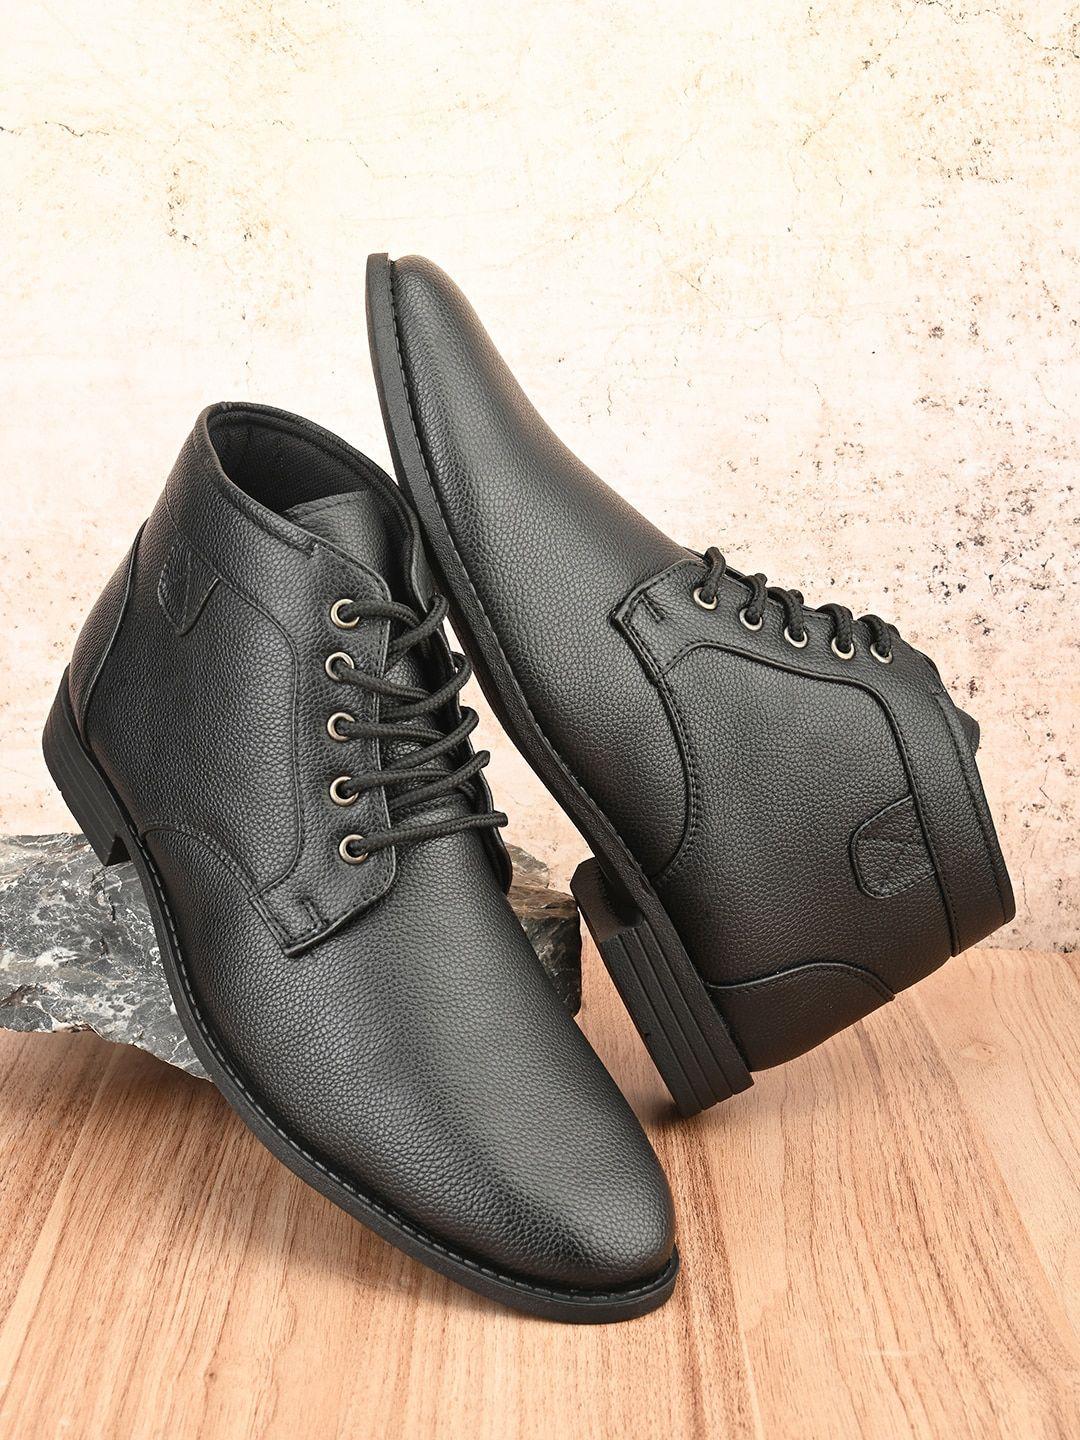 the roadster lifestyle co. men black textured mid-top regular boots